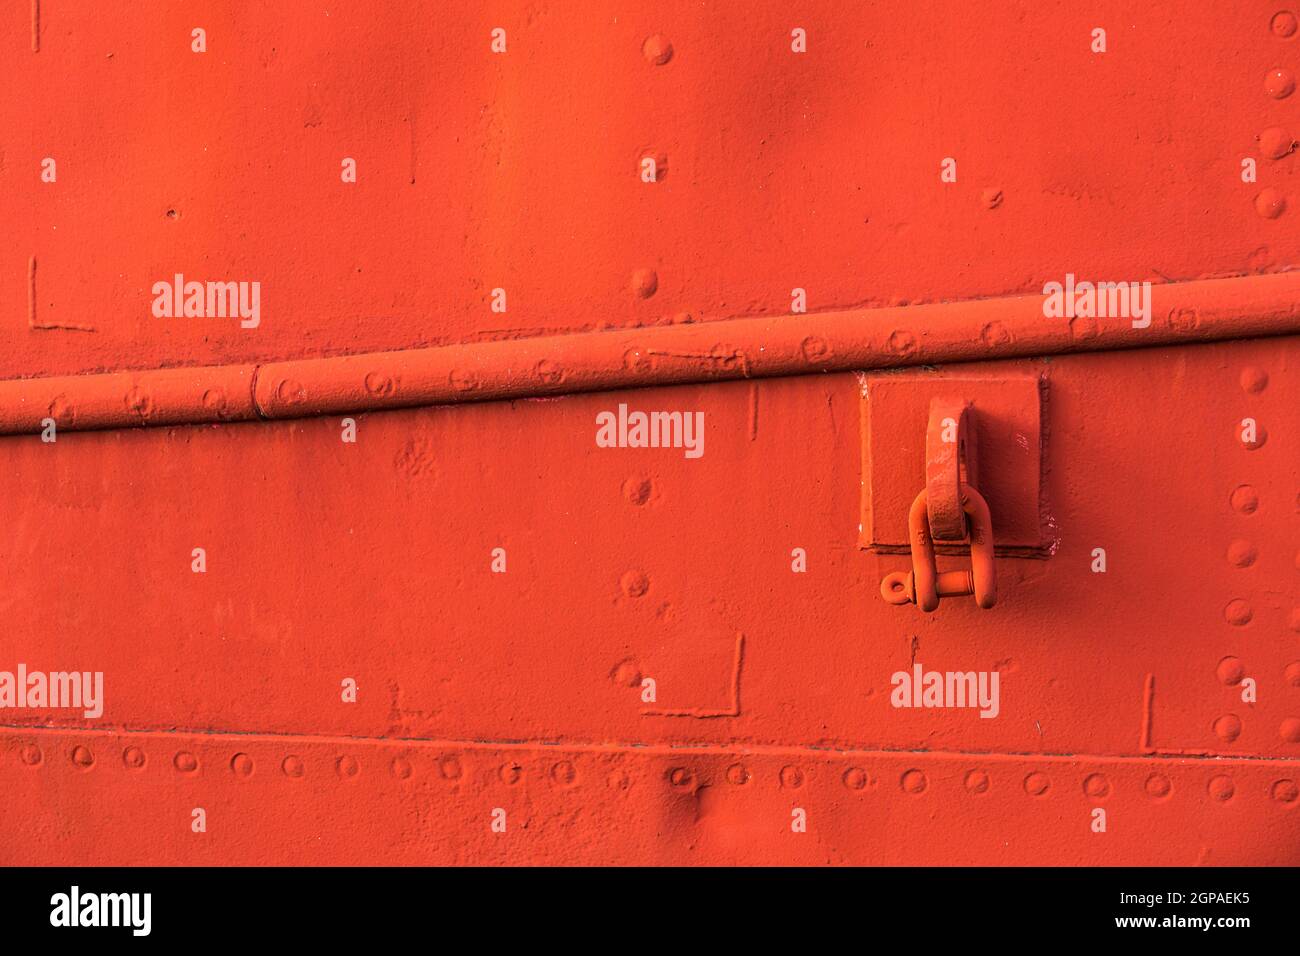 Grungy red texture, old surface of metal boat, abstract background. Stock Photo